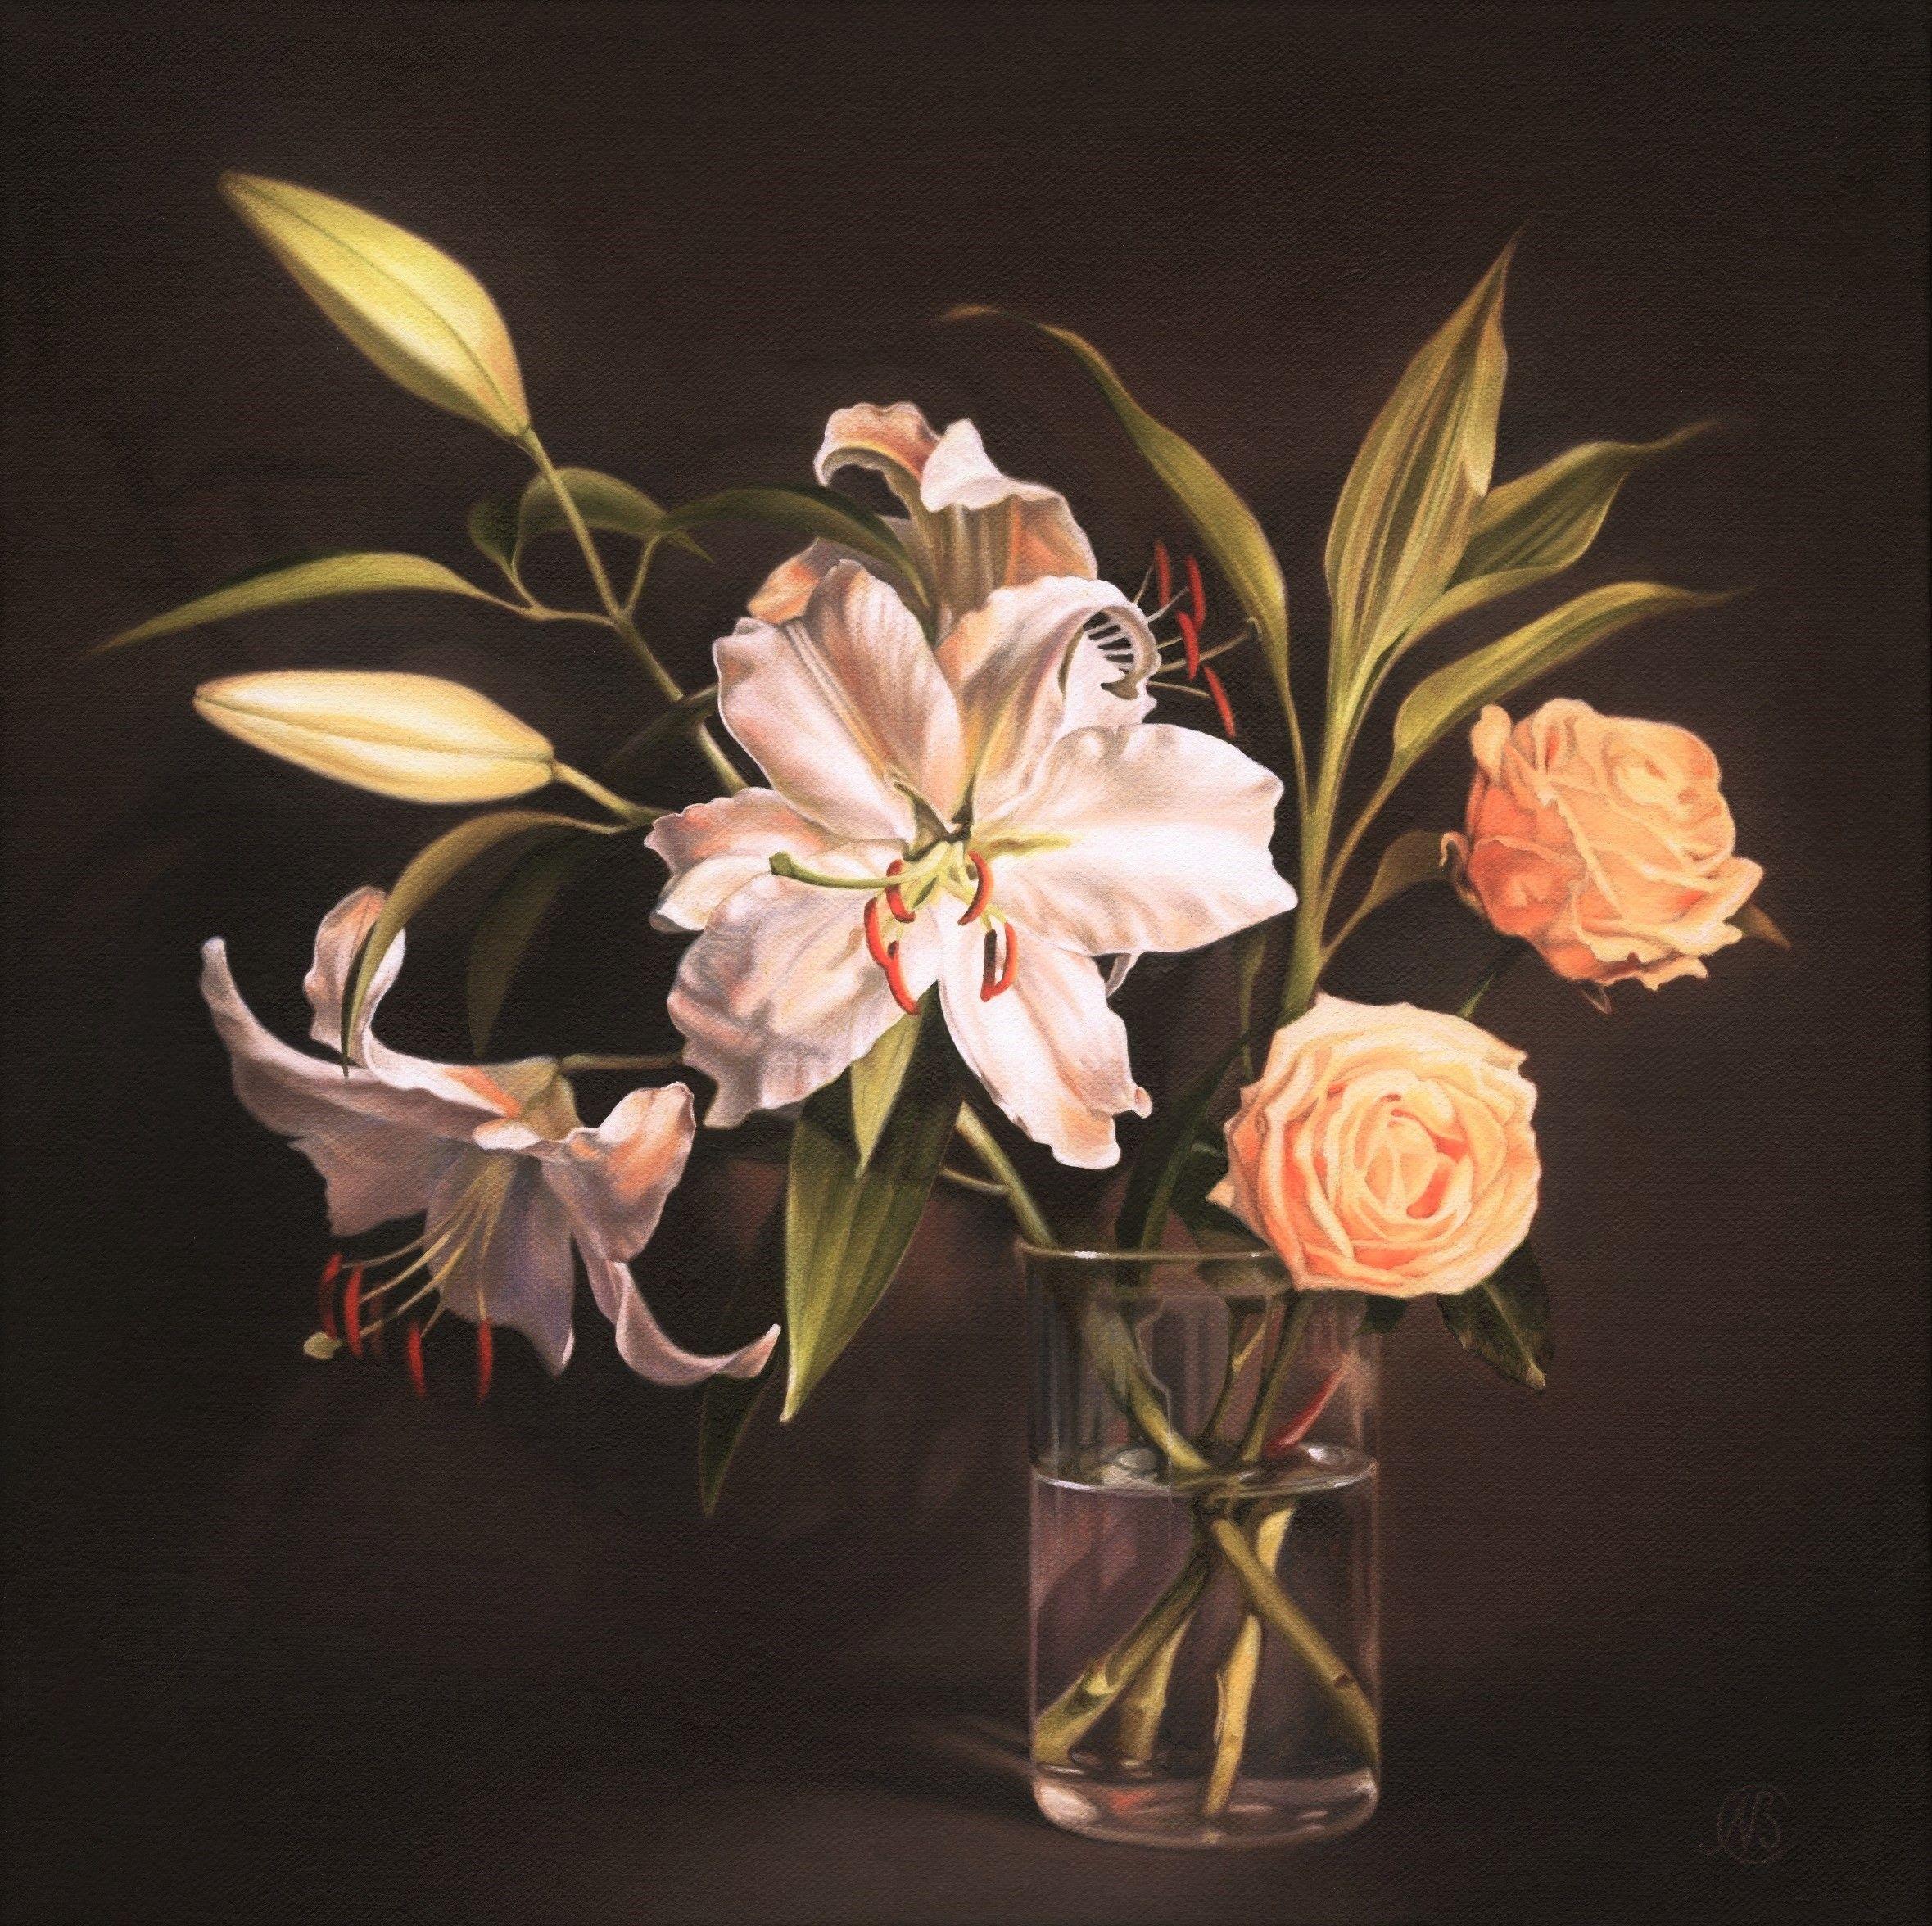 The Lilies and Roses donΓÇÖt compete in beauty but complement each other to create a charming bouquet symbolizing purity, gracefulness and love.   This artwork continues round the sides and may be hung unframed. :: Painting :: Realism :: This piece